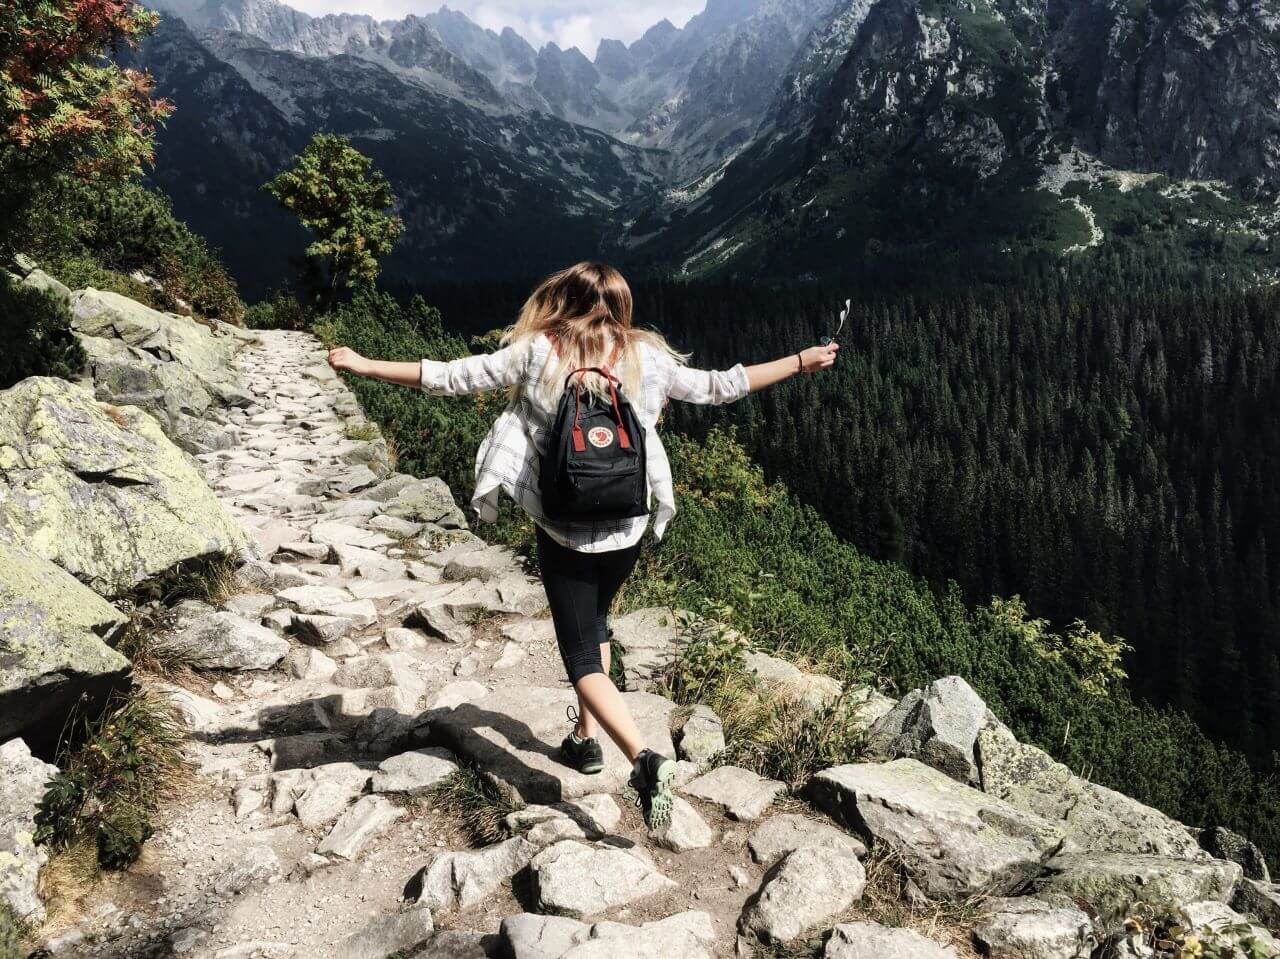 A woman hiking in the mountains